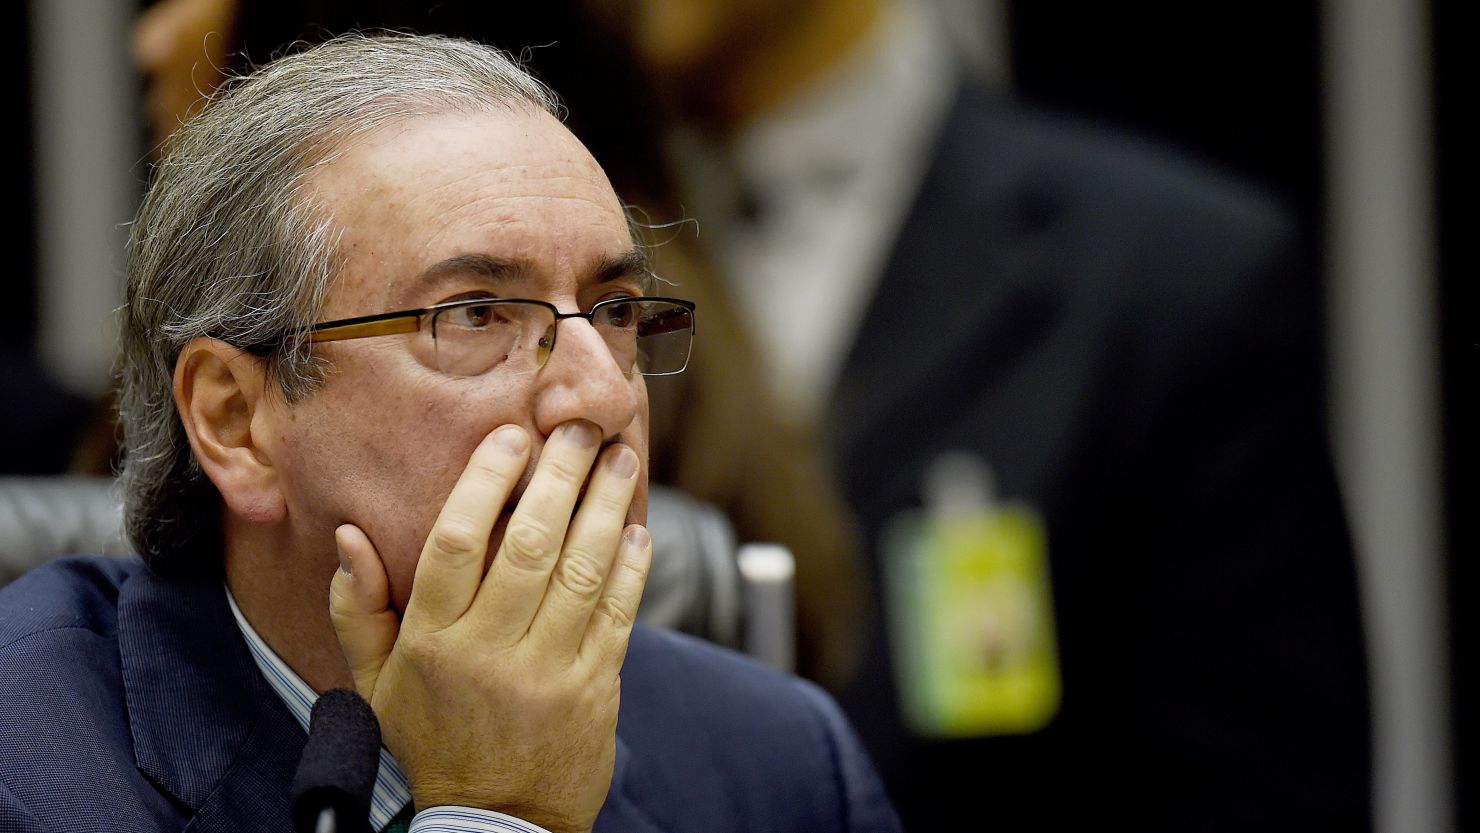 Speaker Eduardo Cunha has denied bribery and money laundering allegations in the "Car Wash" probe.